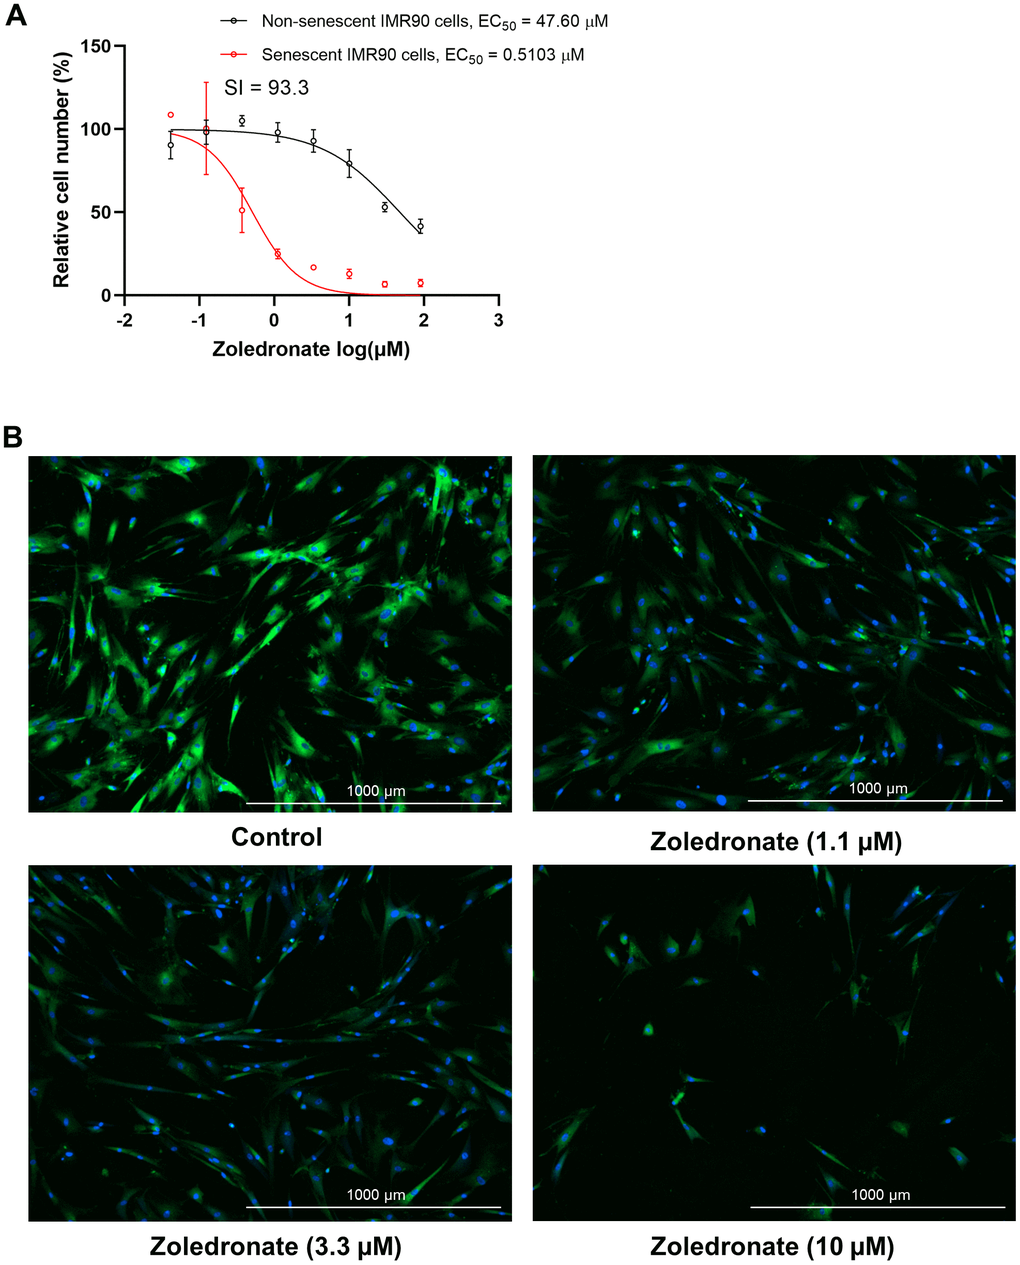 Zoledronic acid has senolytic effects in human lung fibroblast IMR90 cells. (A) Increasing concentrations (0.04-90 μM) of zoledronic acid were tested for 72 h in IMR90 cells. The figure shows the percentage non-senescent (black) and senescent IMR90 cells (red) remaining after 72 hours of treatment. n = 3; (B) Representative images of C12FDG-based senescence assay of zoledronic acid in senescent IMR90 cells. Blue fluorescence indicates nucleus staining with Hoechst 33324, and bright green fluorescence indicates SA-β-gal positive senescent cells whereas dim green fluorescence represents SA-β-gal low or negative, non-senescent cells. Images were taken using Cytation 1 at 4X.